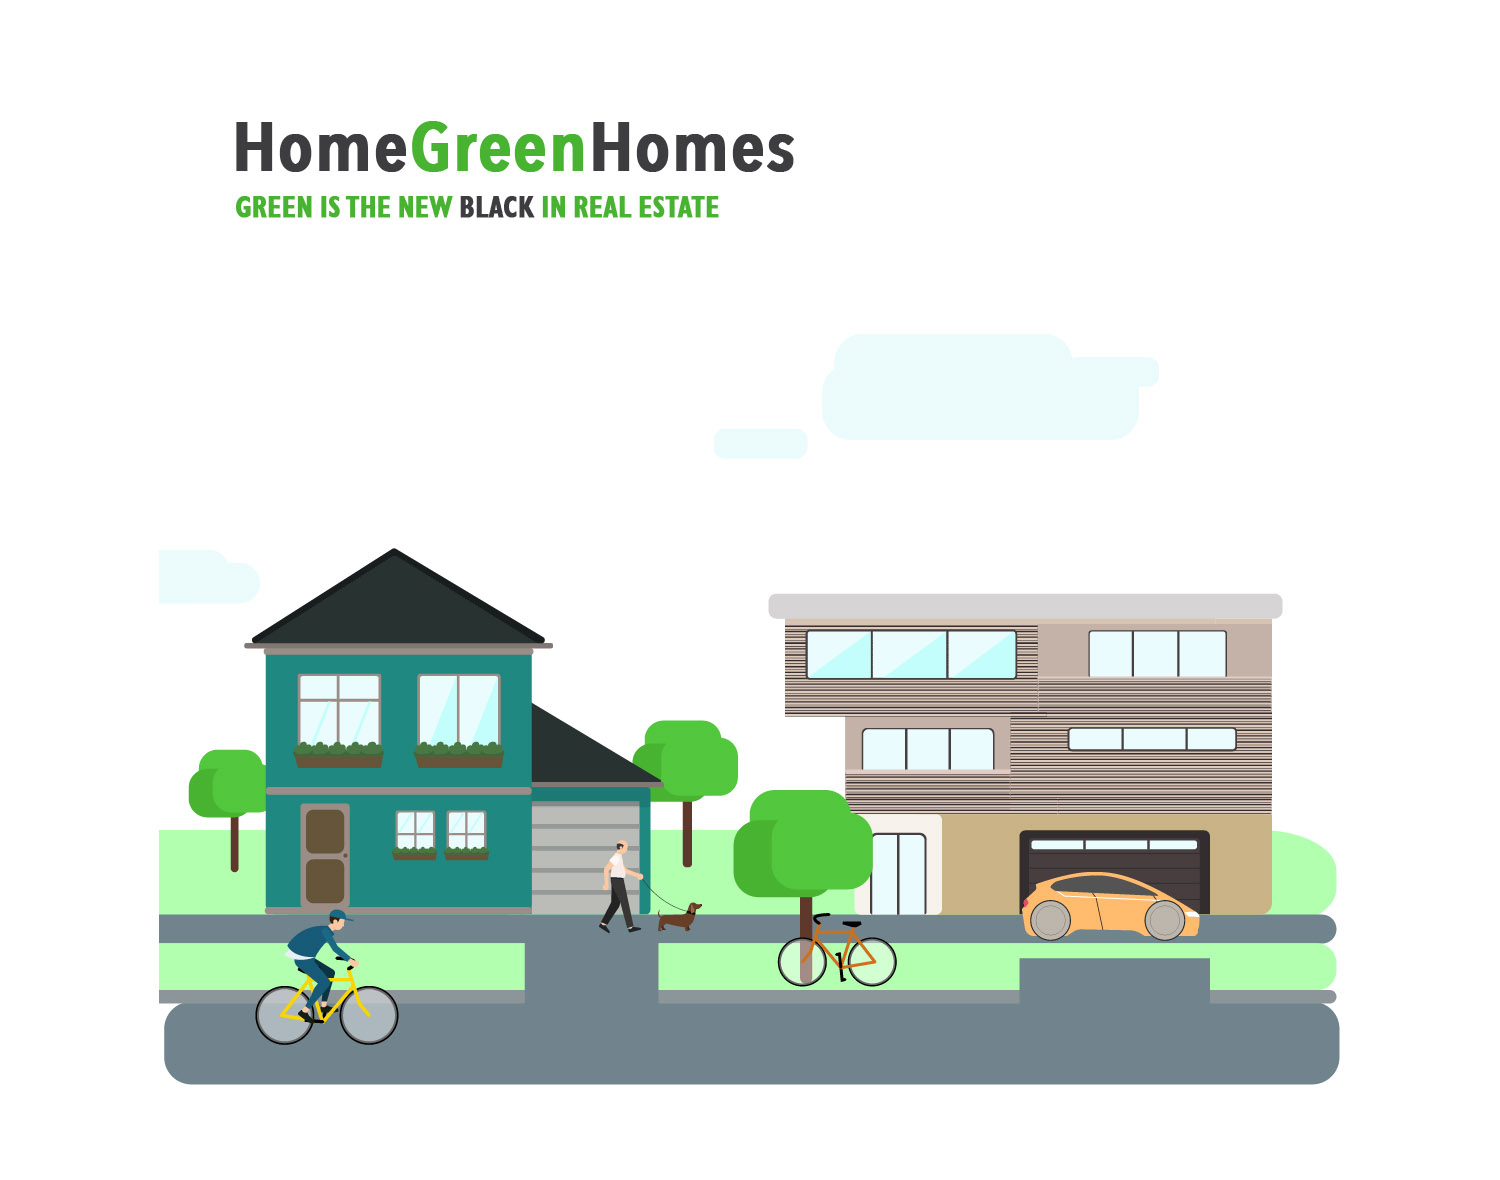 9 Things Williamsons Did To Make Their Home Green